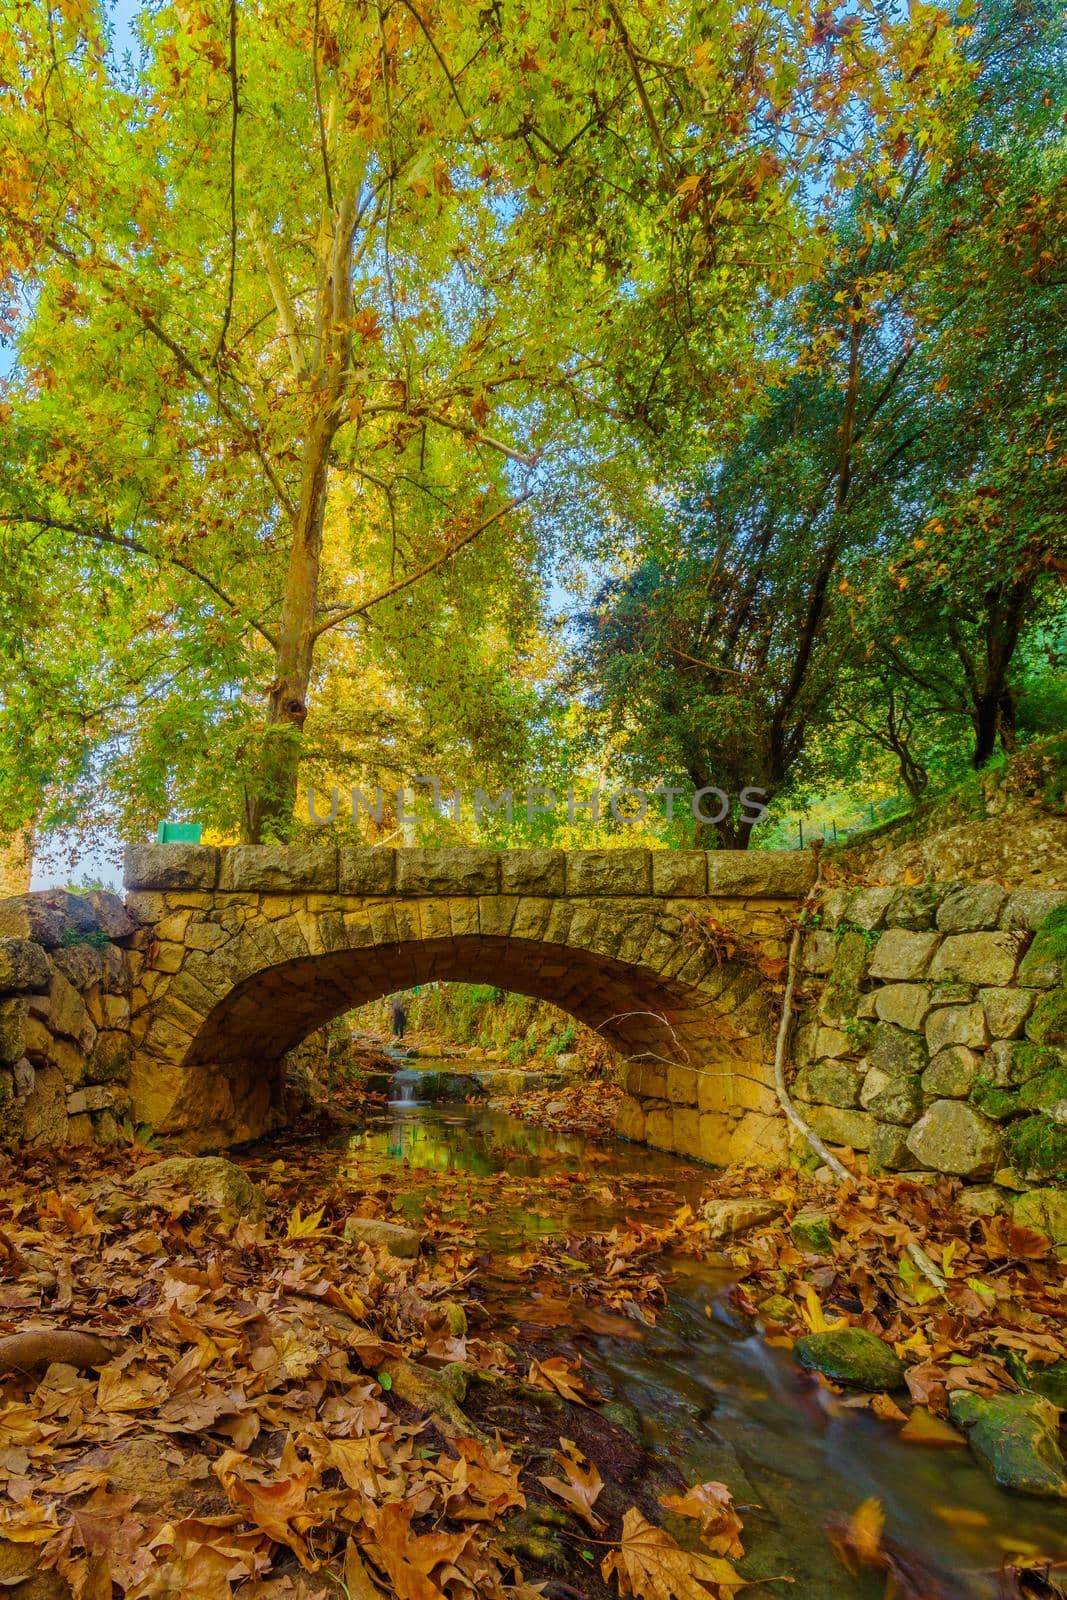 View of the Kesalon Stream with a stone bridge, trees, and fall foliage, in En Hemed National Park (Aqua Bella), west of Jerusalem, Israel